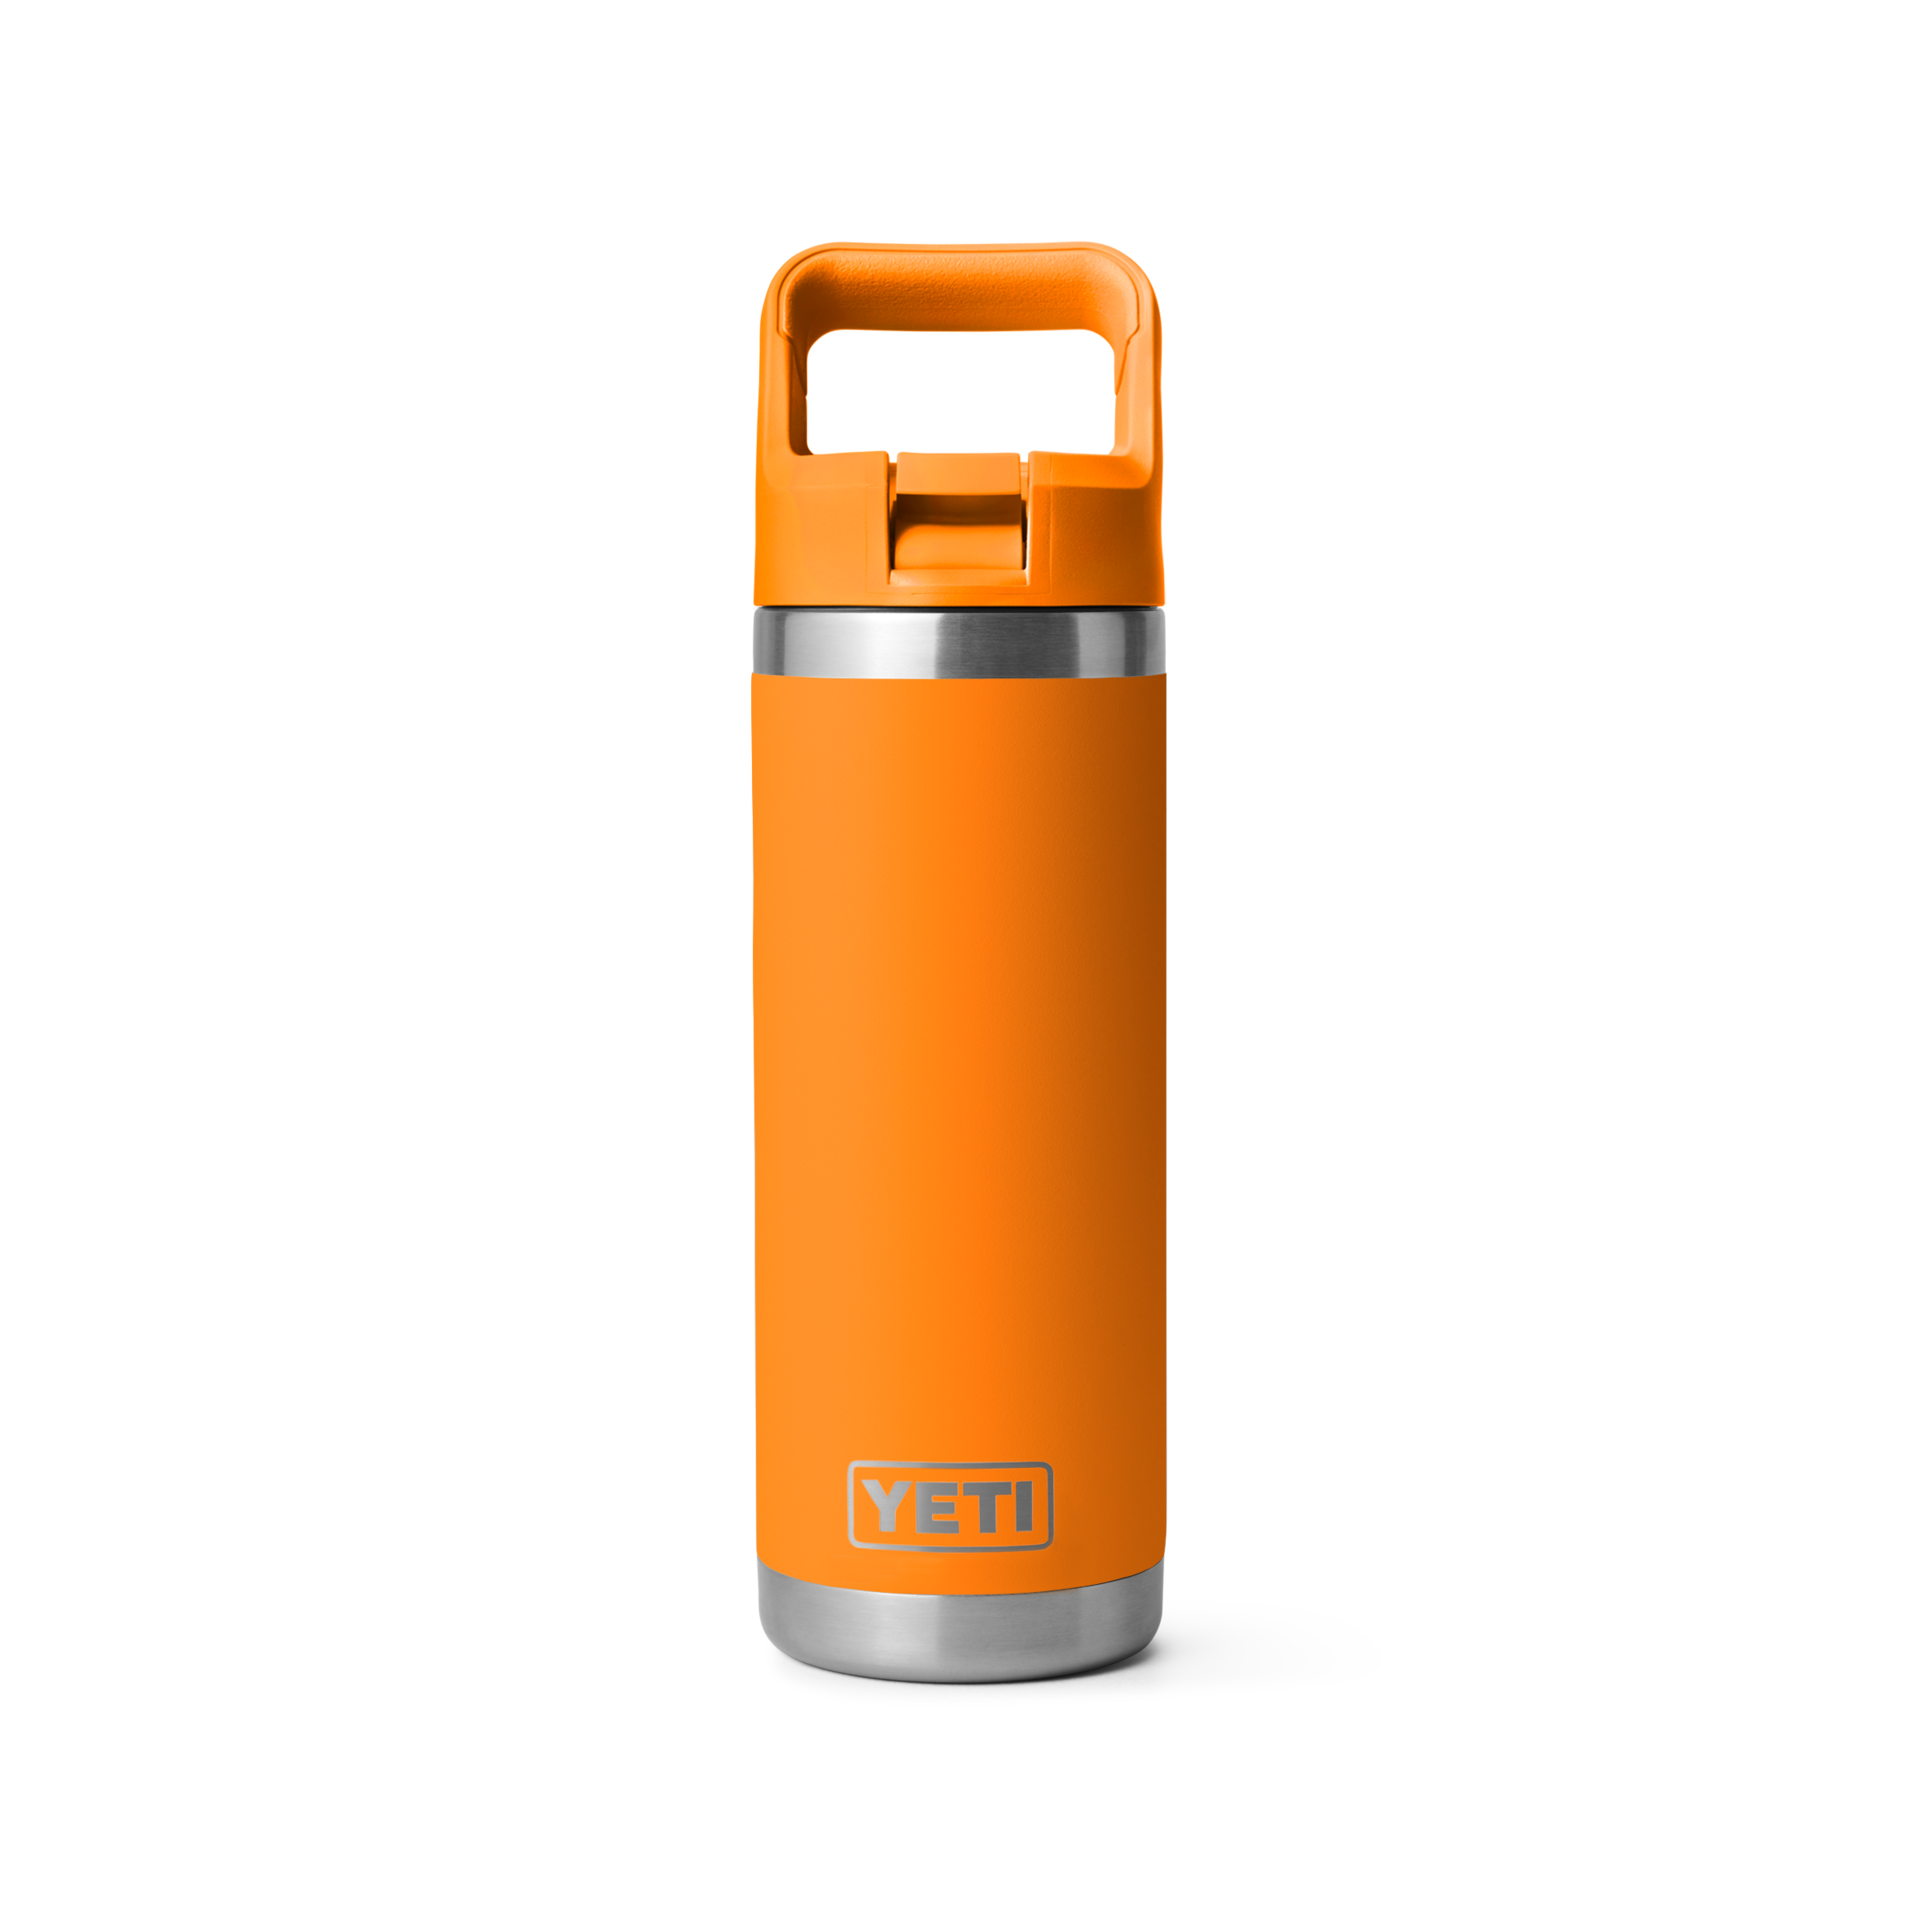 Yeti Rambler 18oz/532ml Water Bottle with Colour Matched Straw Cap